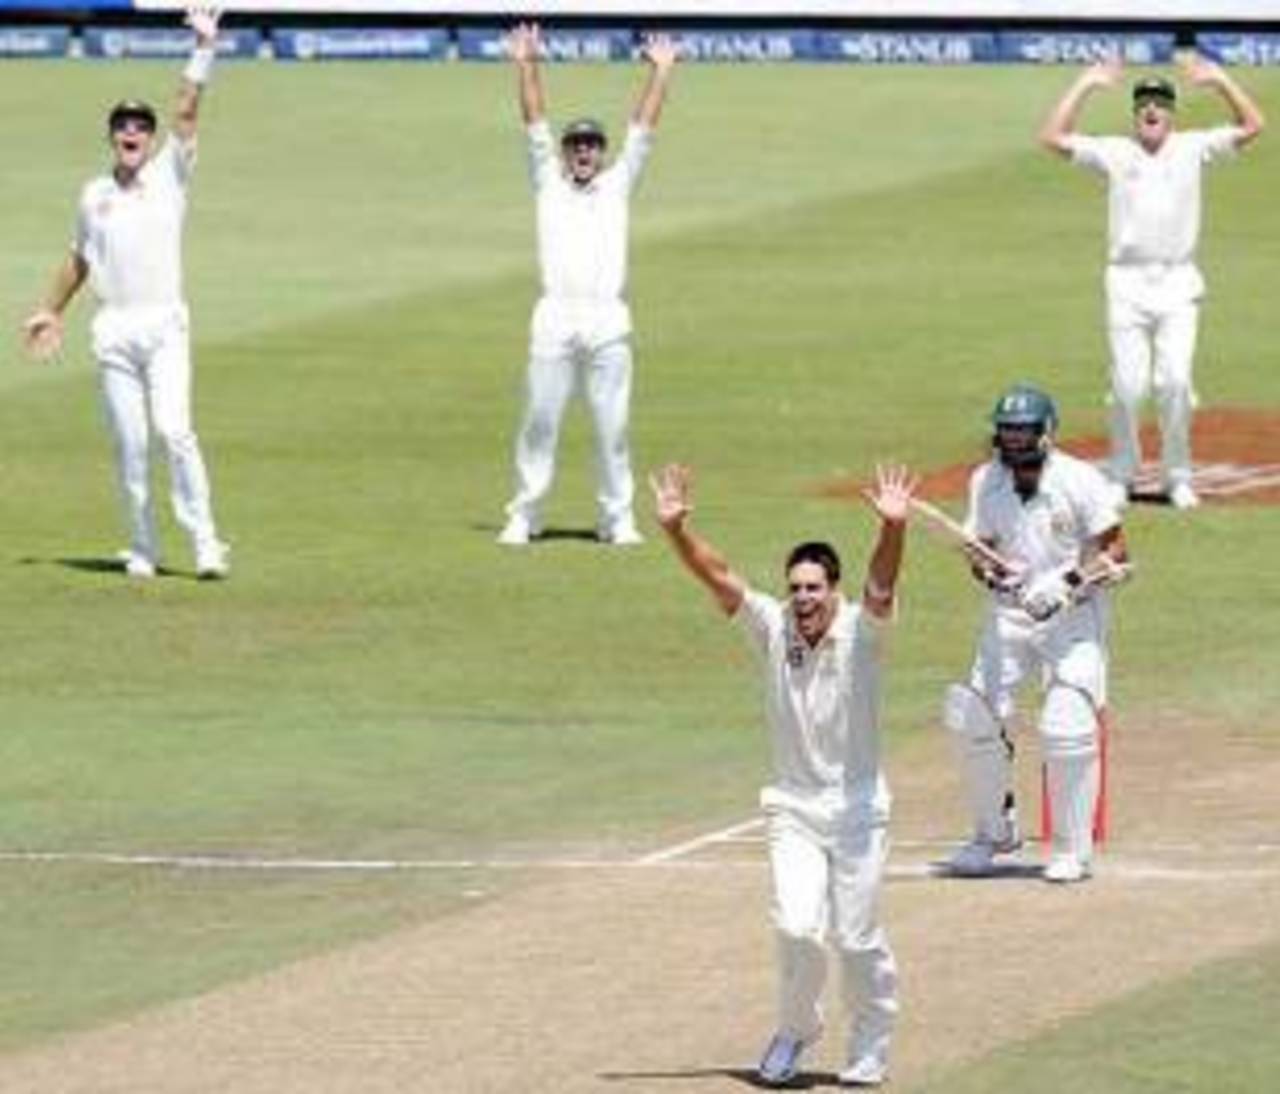 Mitchell Johnson successfully appeals against Hashim Amla, South Africa v Australia, 2nd Test, Durban, 2nd day, March 7, 2009